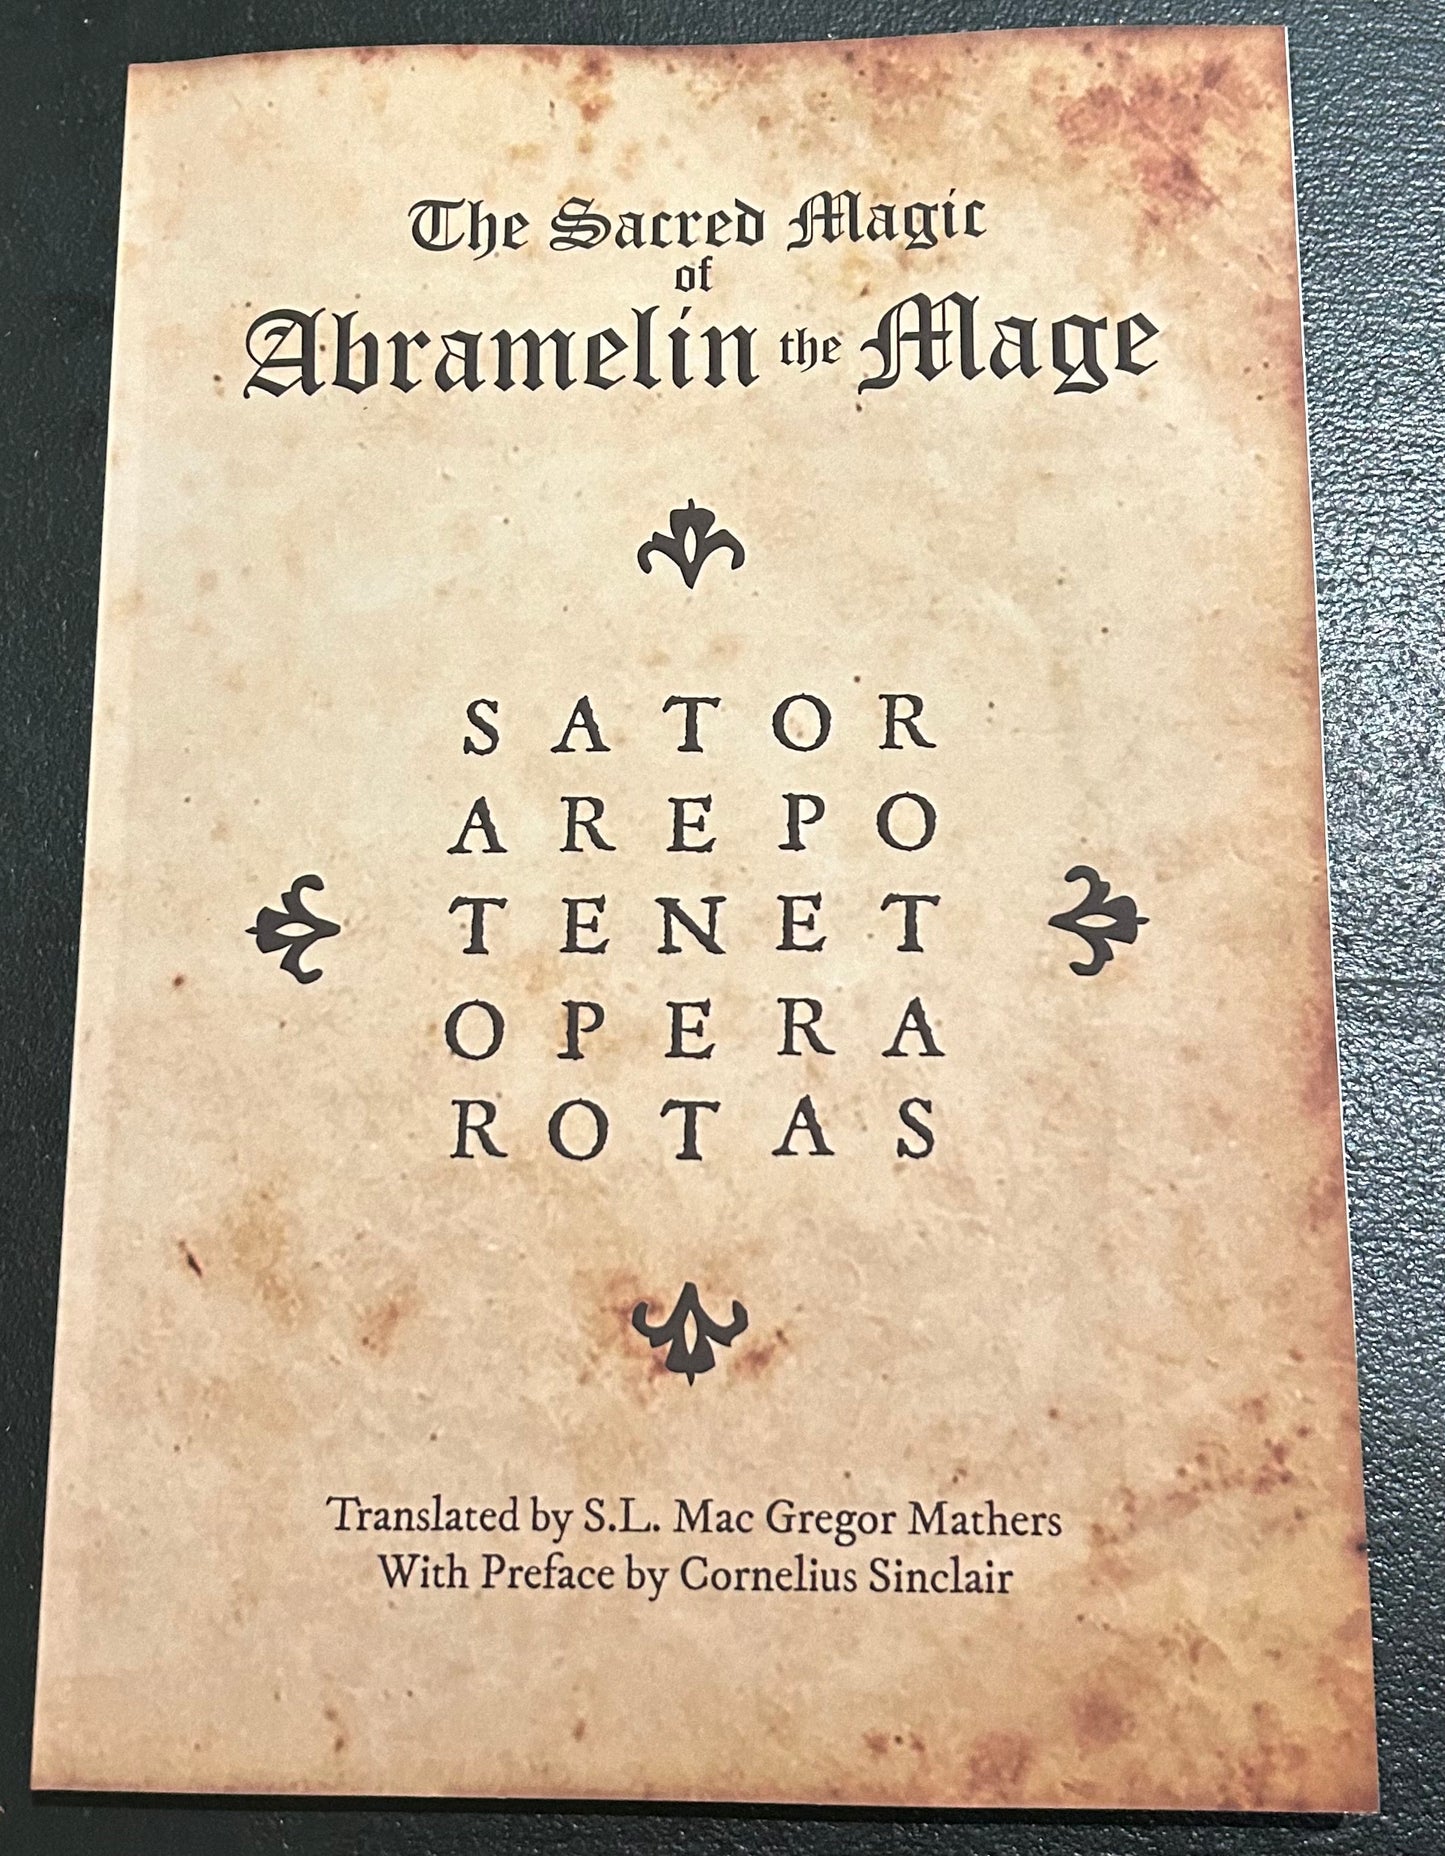 The Sacred Magic of Abramelin the Mage - S.L. Mac Gregor Mathers